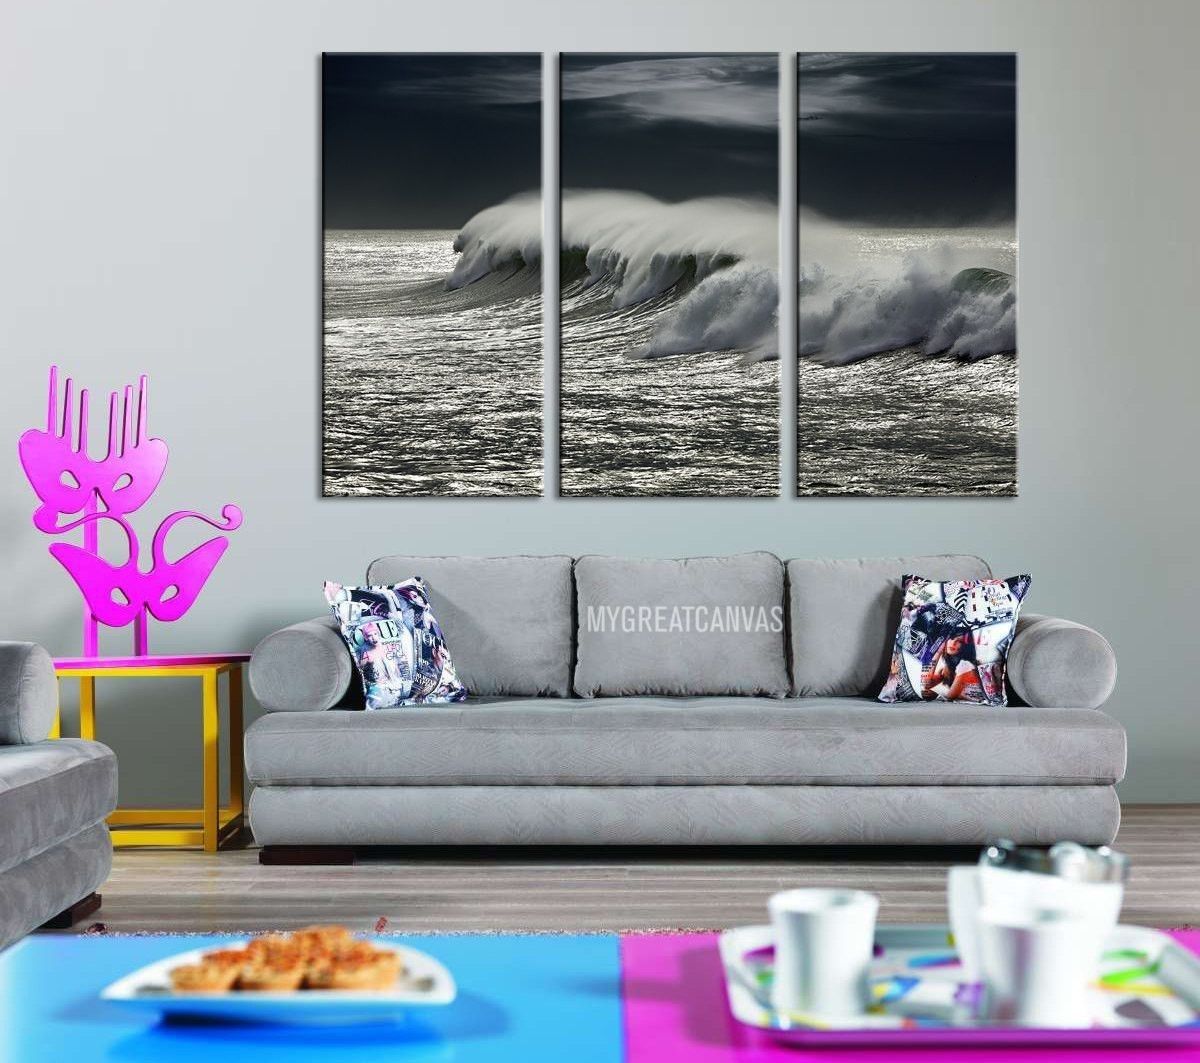 Large Wall Art Giclee 3 Panel Canvas Print – Black And White Ocean Intended For Black And White Large Canvas Wall Art (View 16 of 20)